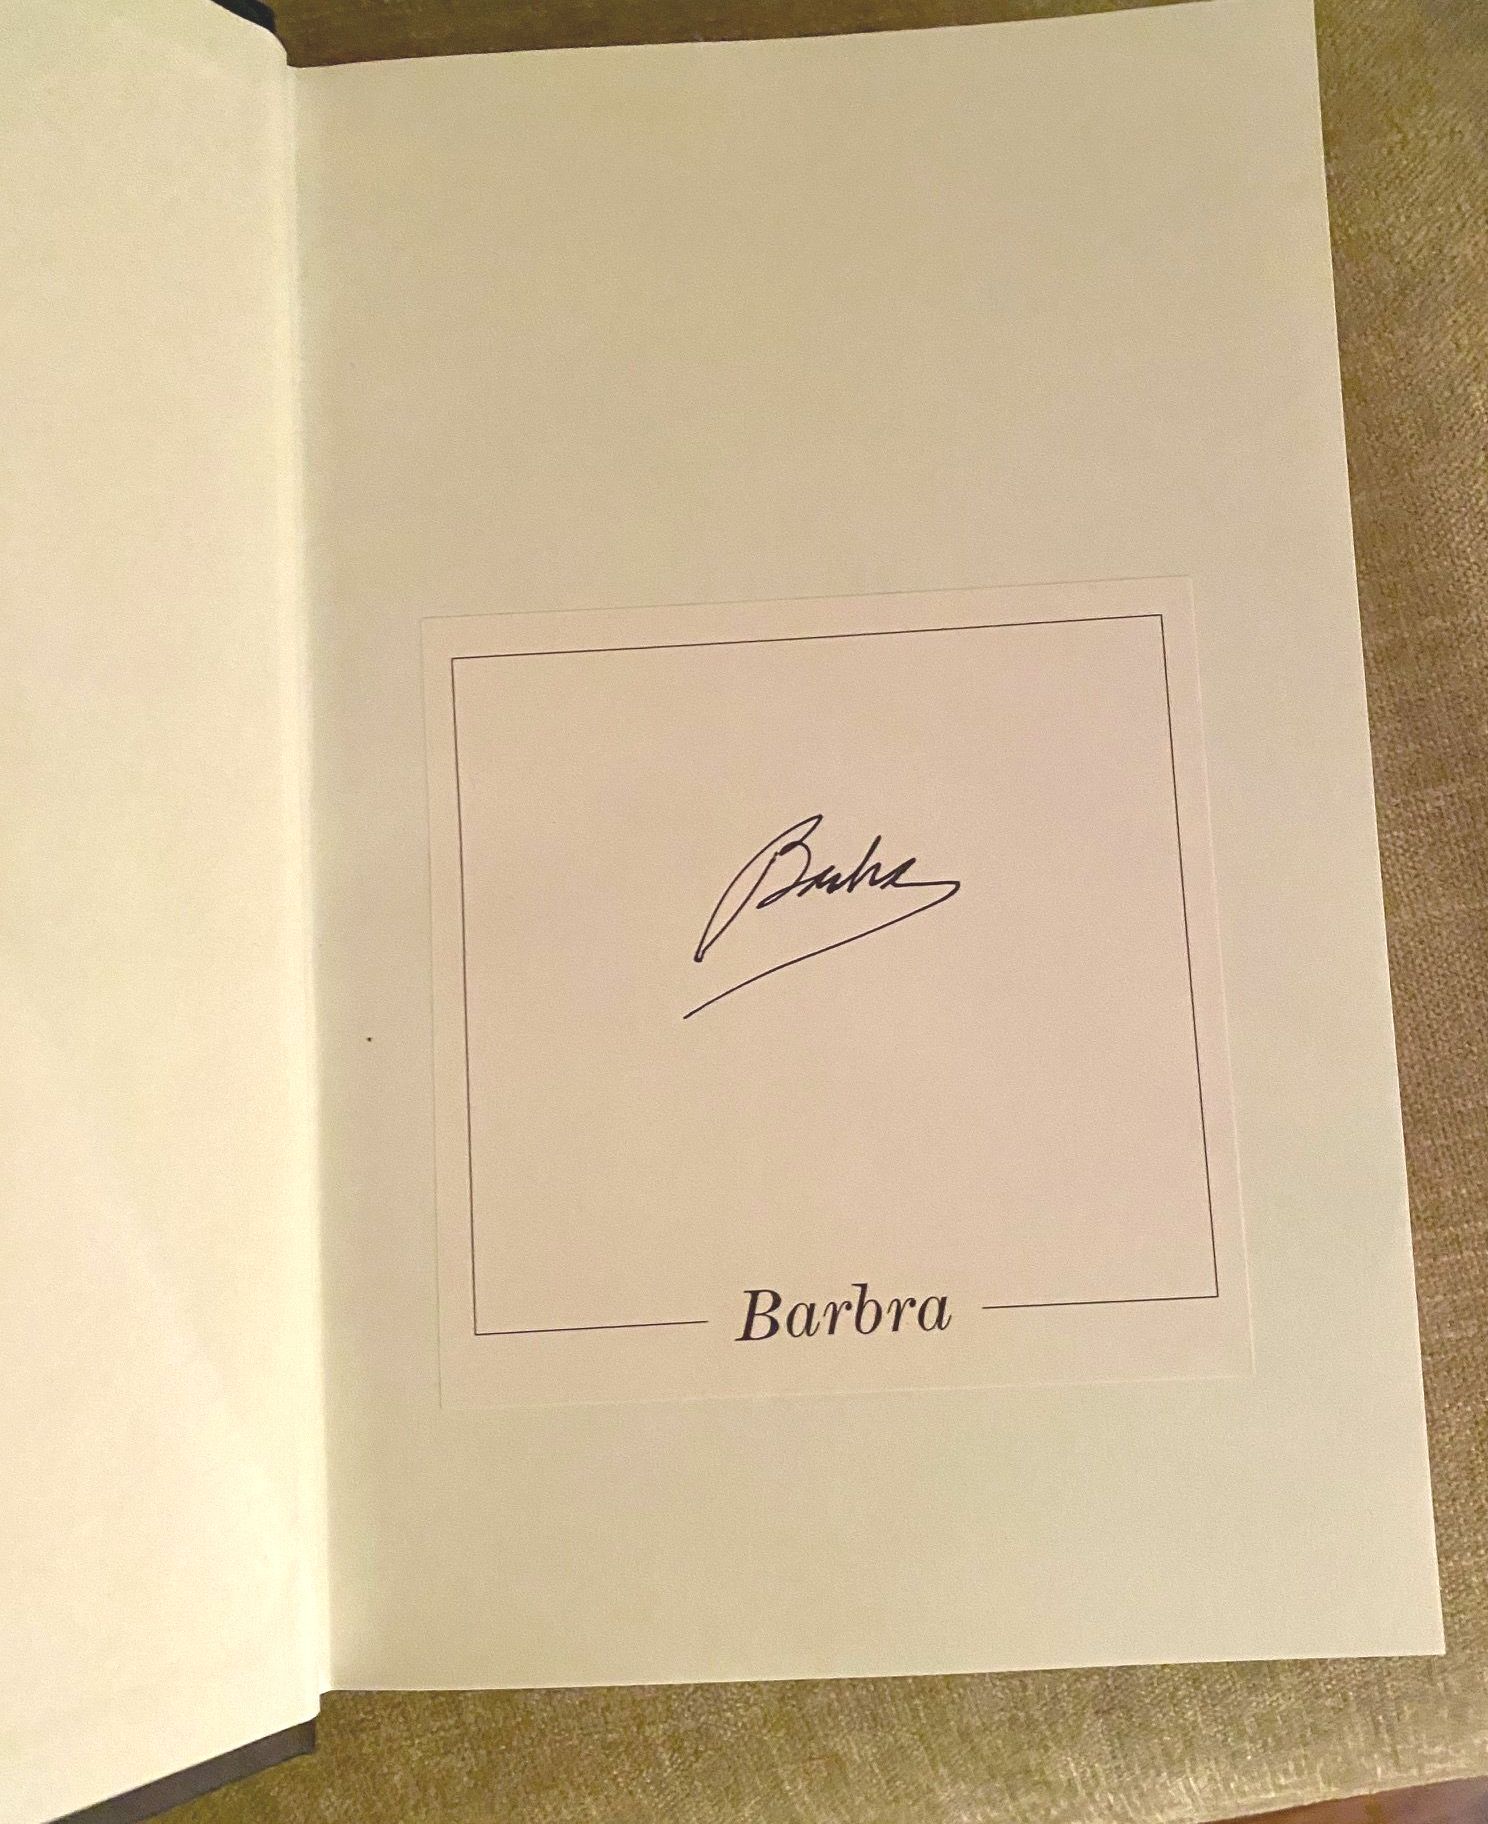 Barnes & Noble signed bookplate by Barbra Streisand.